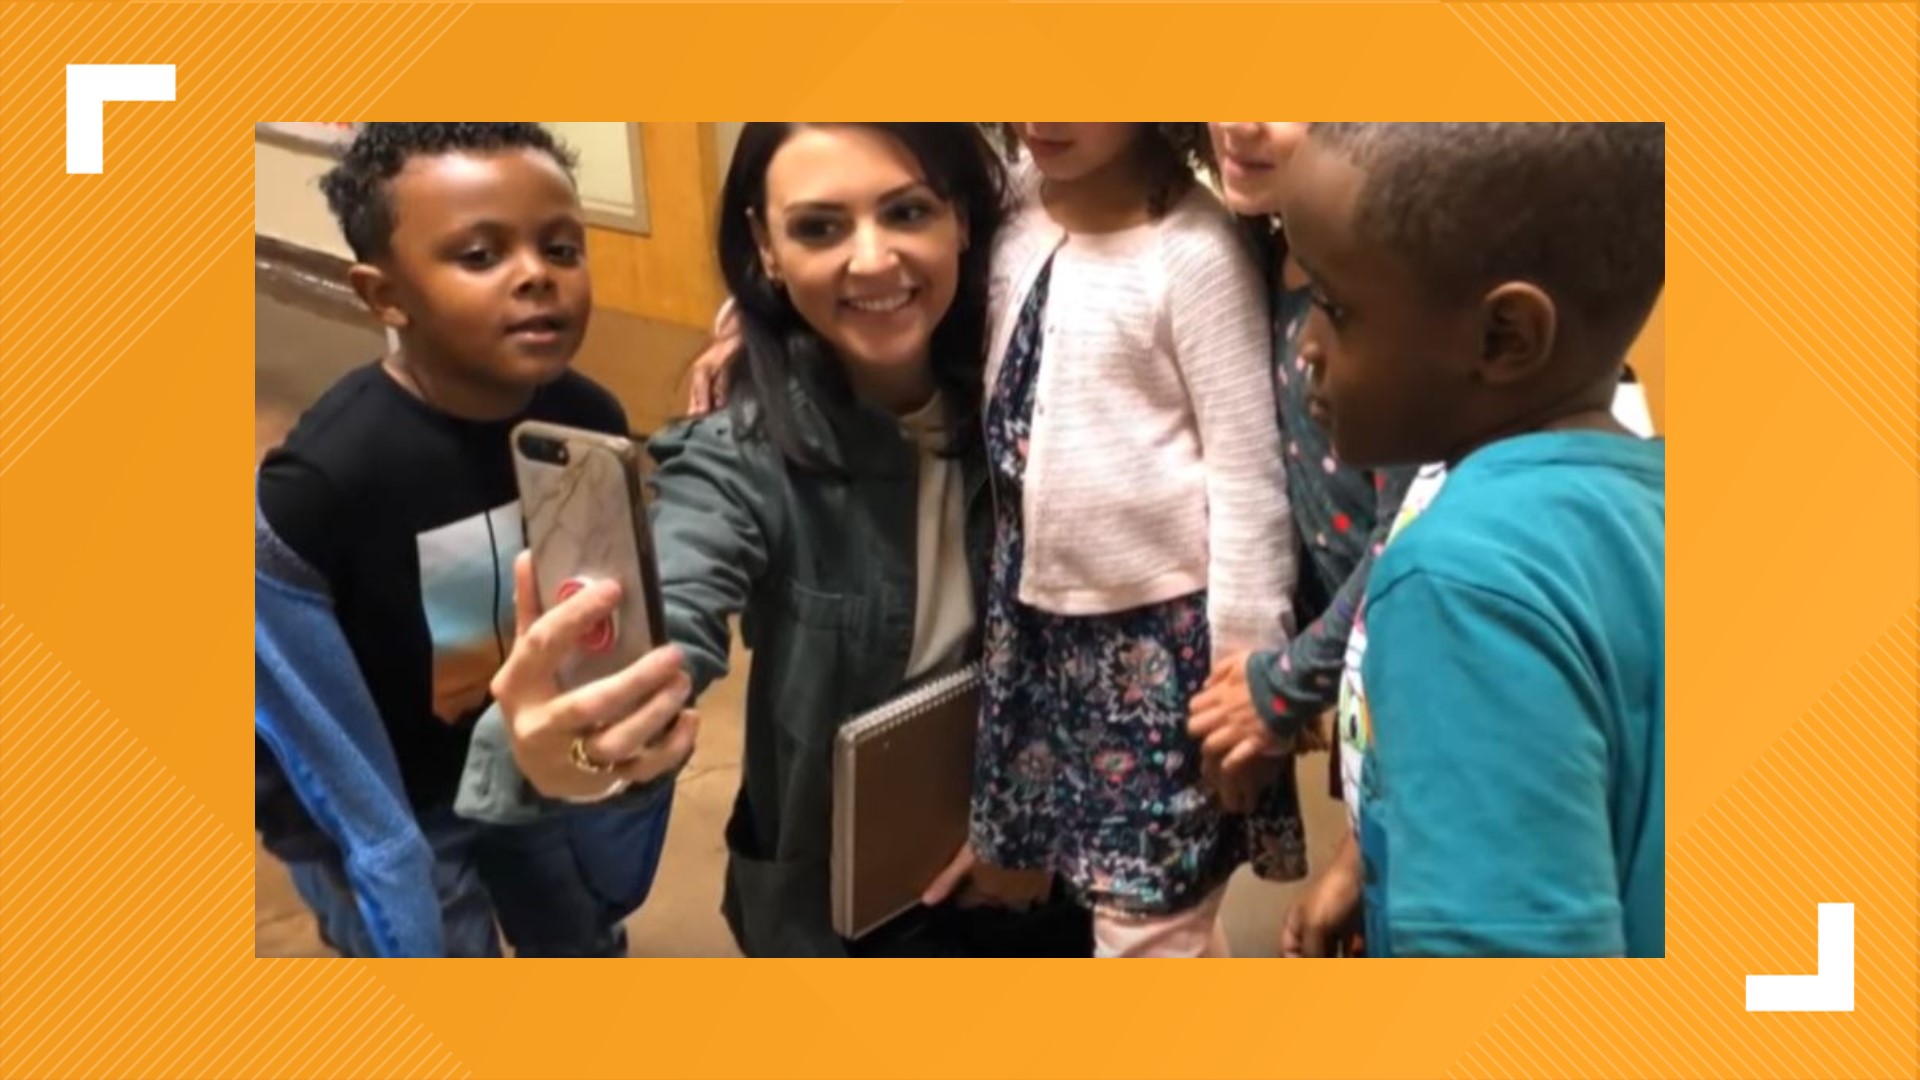 KGW is spending the 2019-20 school year following the students and teachers at Woodlawn Elementary School in Northeast Portland.